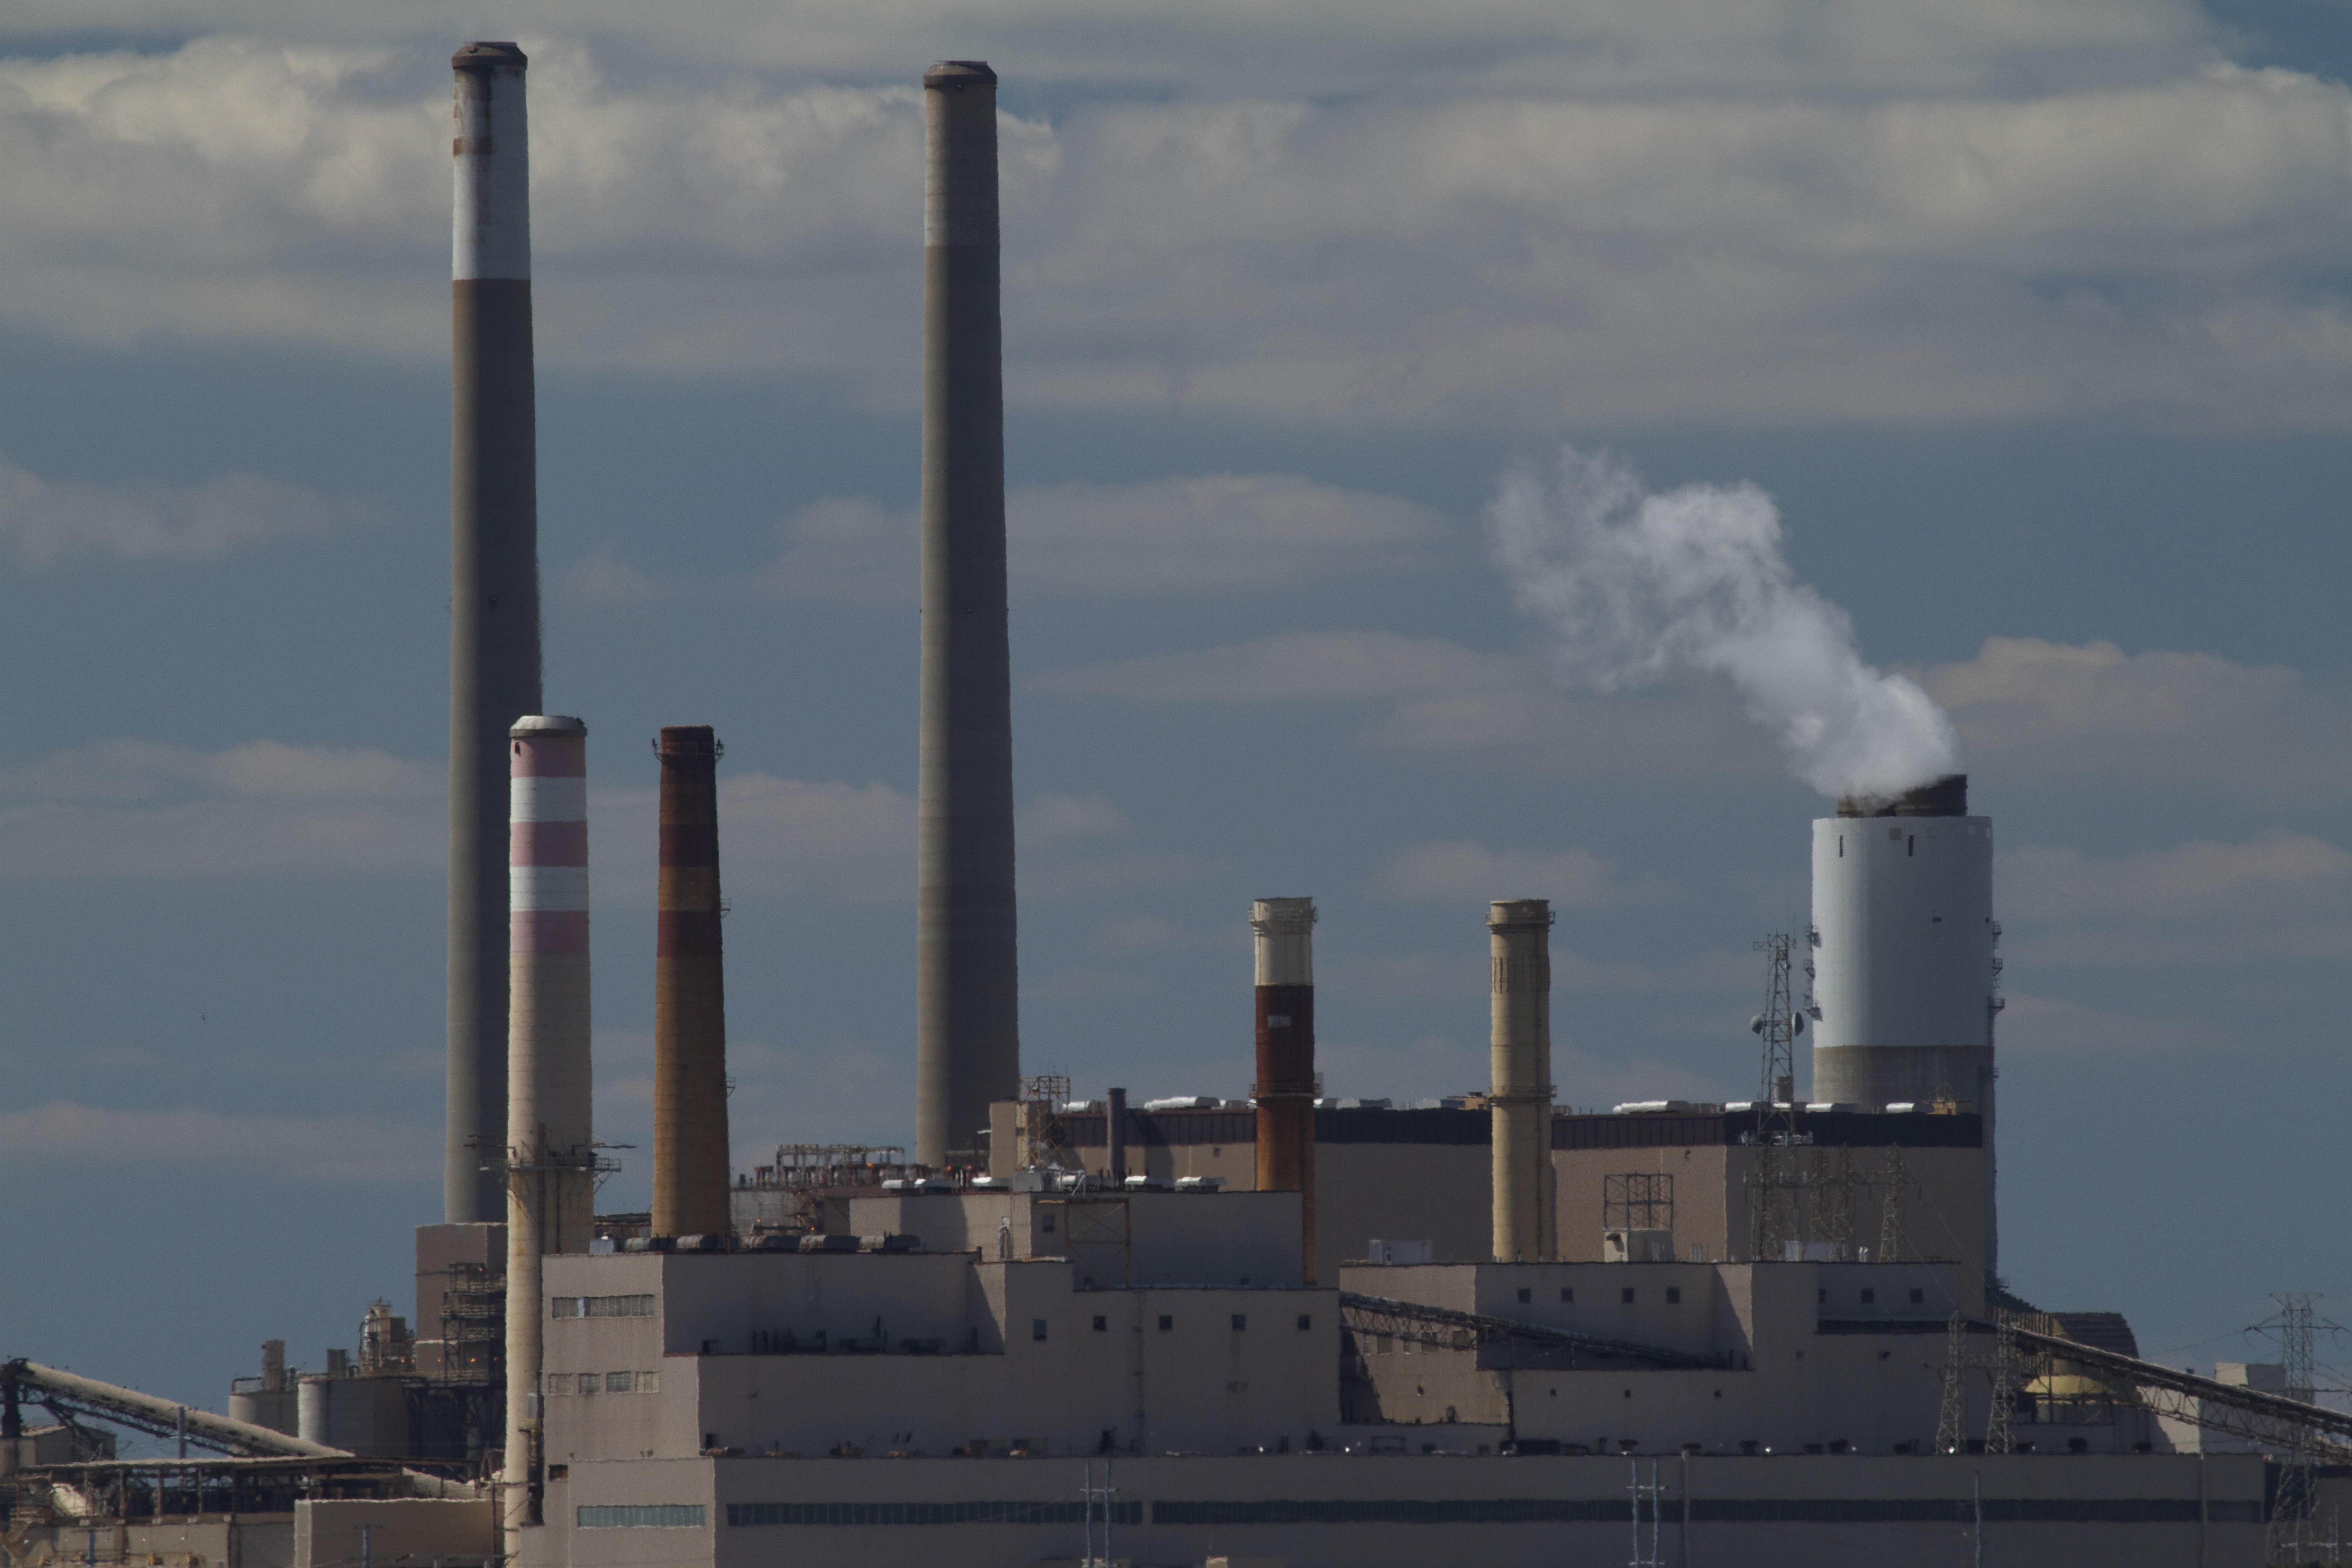 Image of Wagner Coal Plant next to Brandon Shores Coal Plant